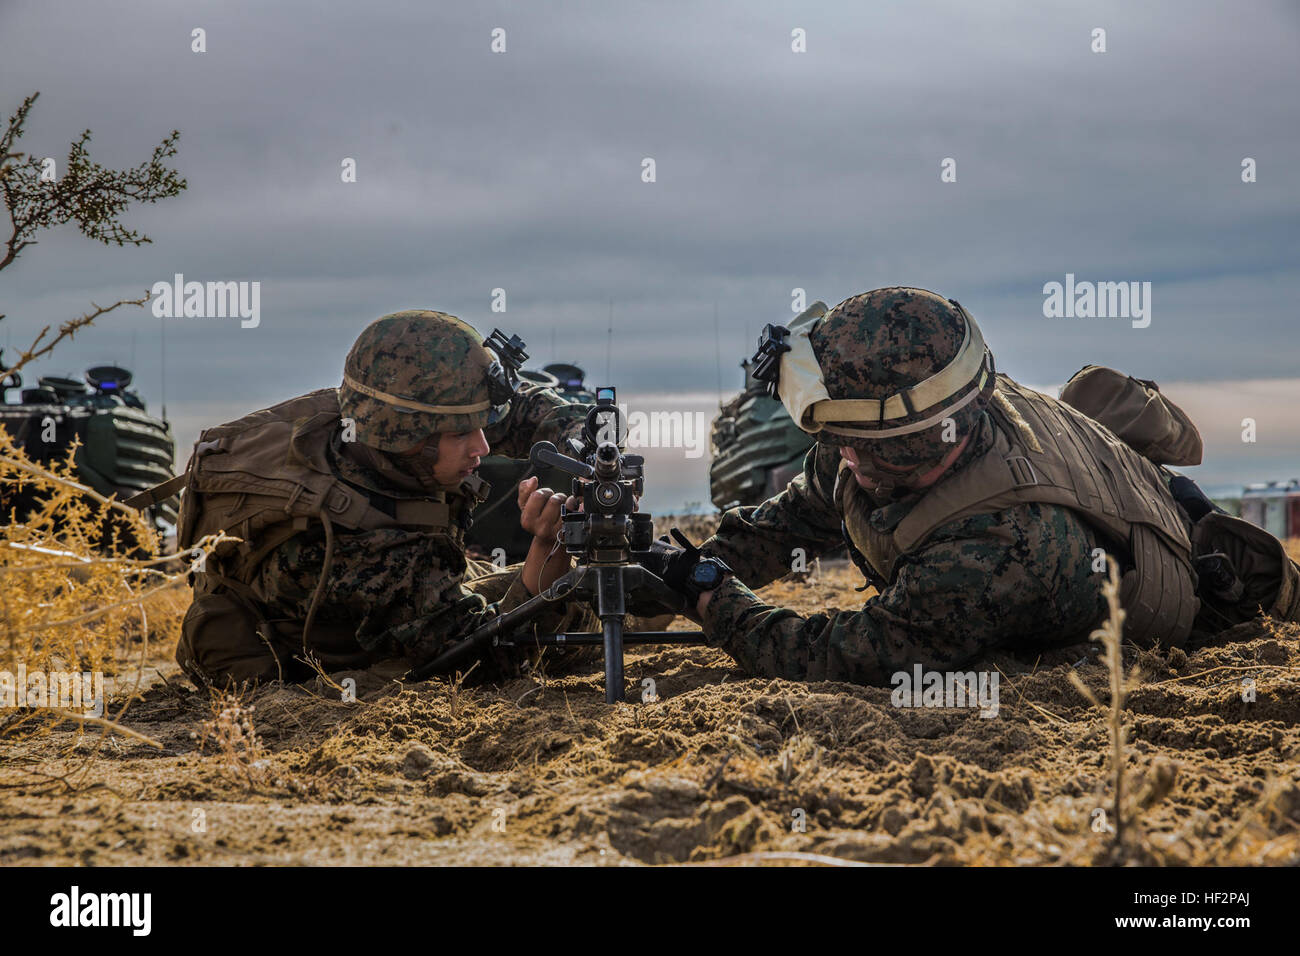 U.S. Marines Lance Cpl. Jalen Freiberg, left, and Lance Cpl. Nicholas Keniston conduct setup rehearsals with an M240B machine gun during a combined arms exercise aboard Marine Corps Air Ground Combat Center, Twentynine Palms, Calif., Dec. 8, 2014. Freiber and Keniston are machine gunners with Battalion Landing Team 3rd Battalion, 1st Marine Regiment, 15th Marine Expeditionary Unit. BLT 3/1 conducted this training concurrent with the 15th MEU’s realistic urban training.  RUT prepares the 15th MEU’s Marines for their upcoming deployment, enhancing their combat skills in environments similar to t Stock Photo